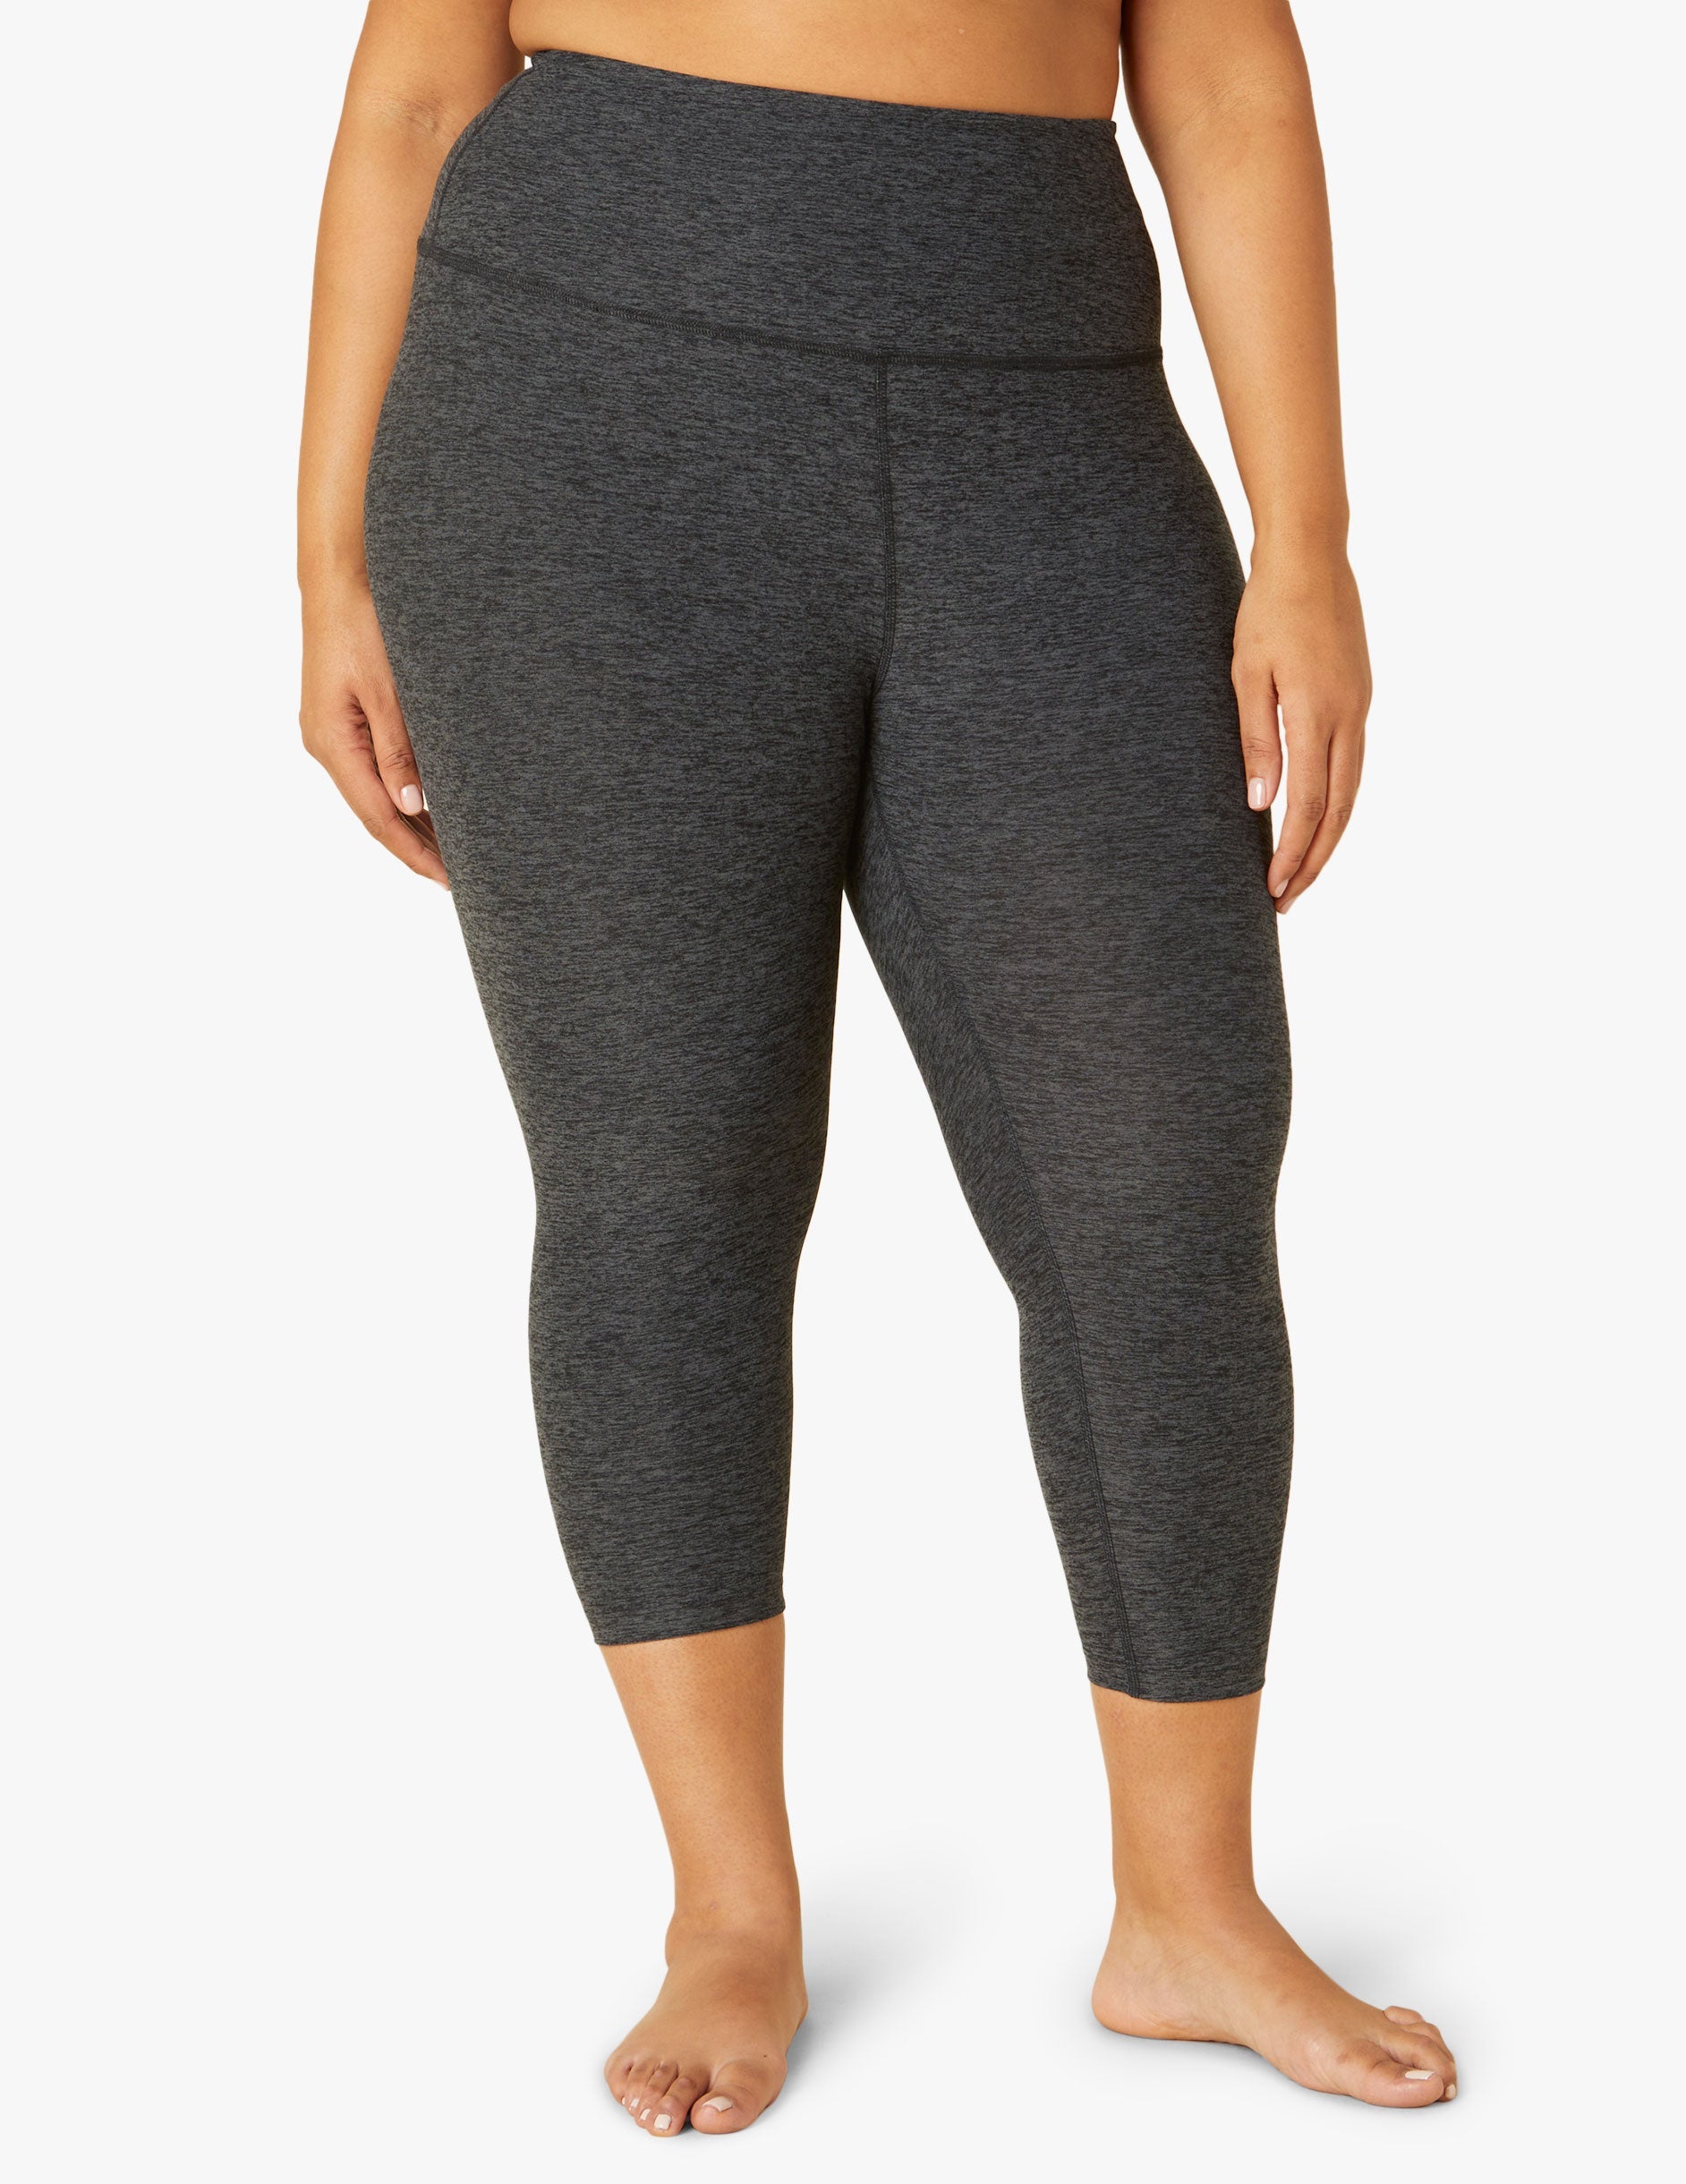 Hold High Waisted Leggings - Space Grey | Women's Best